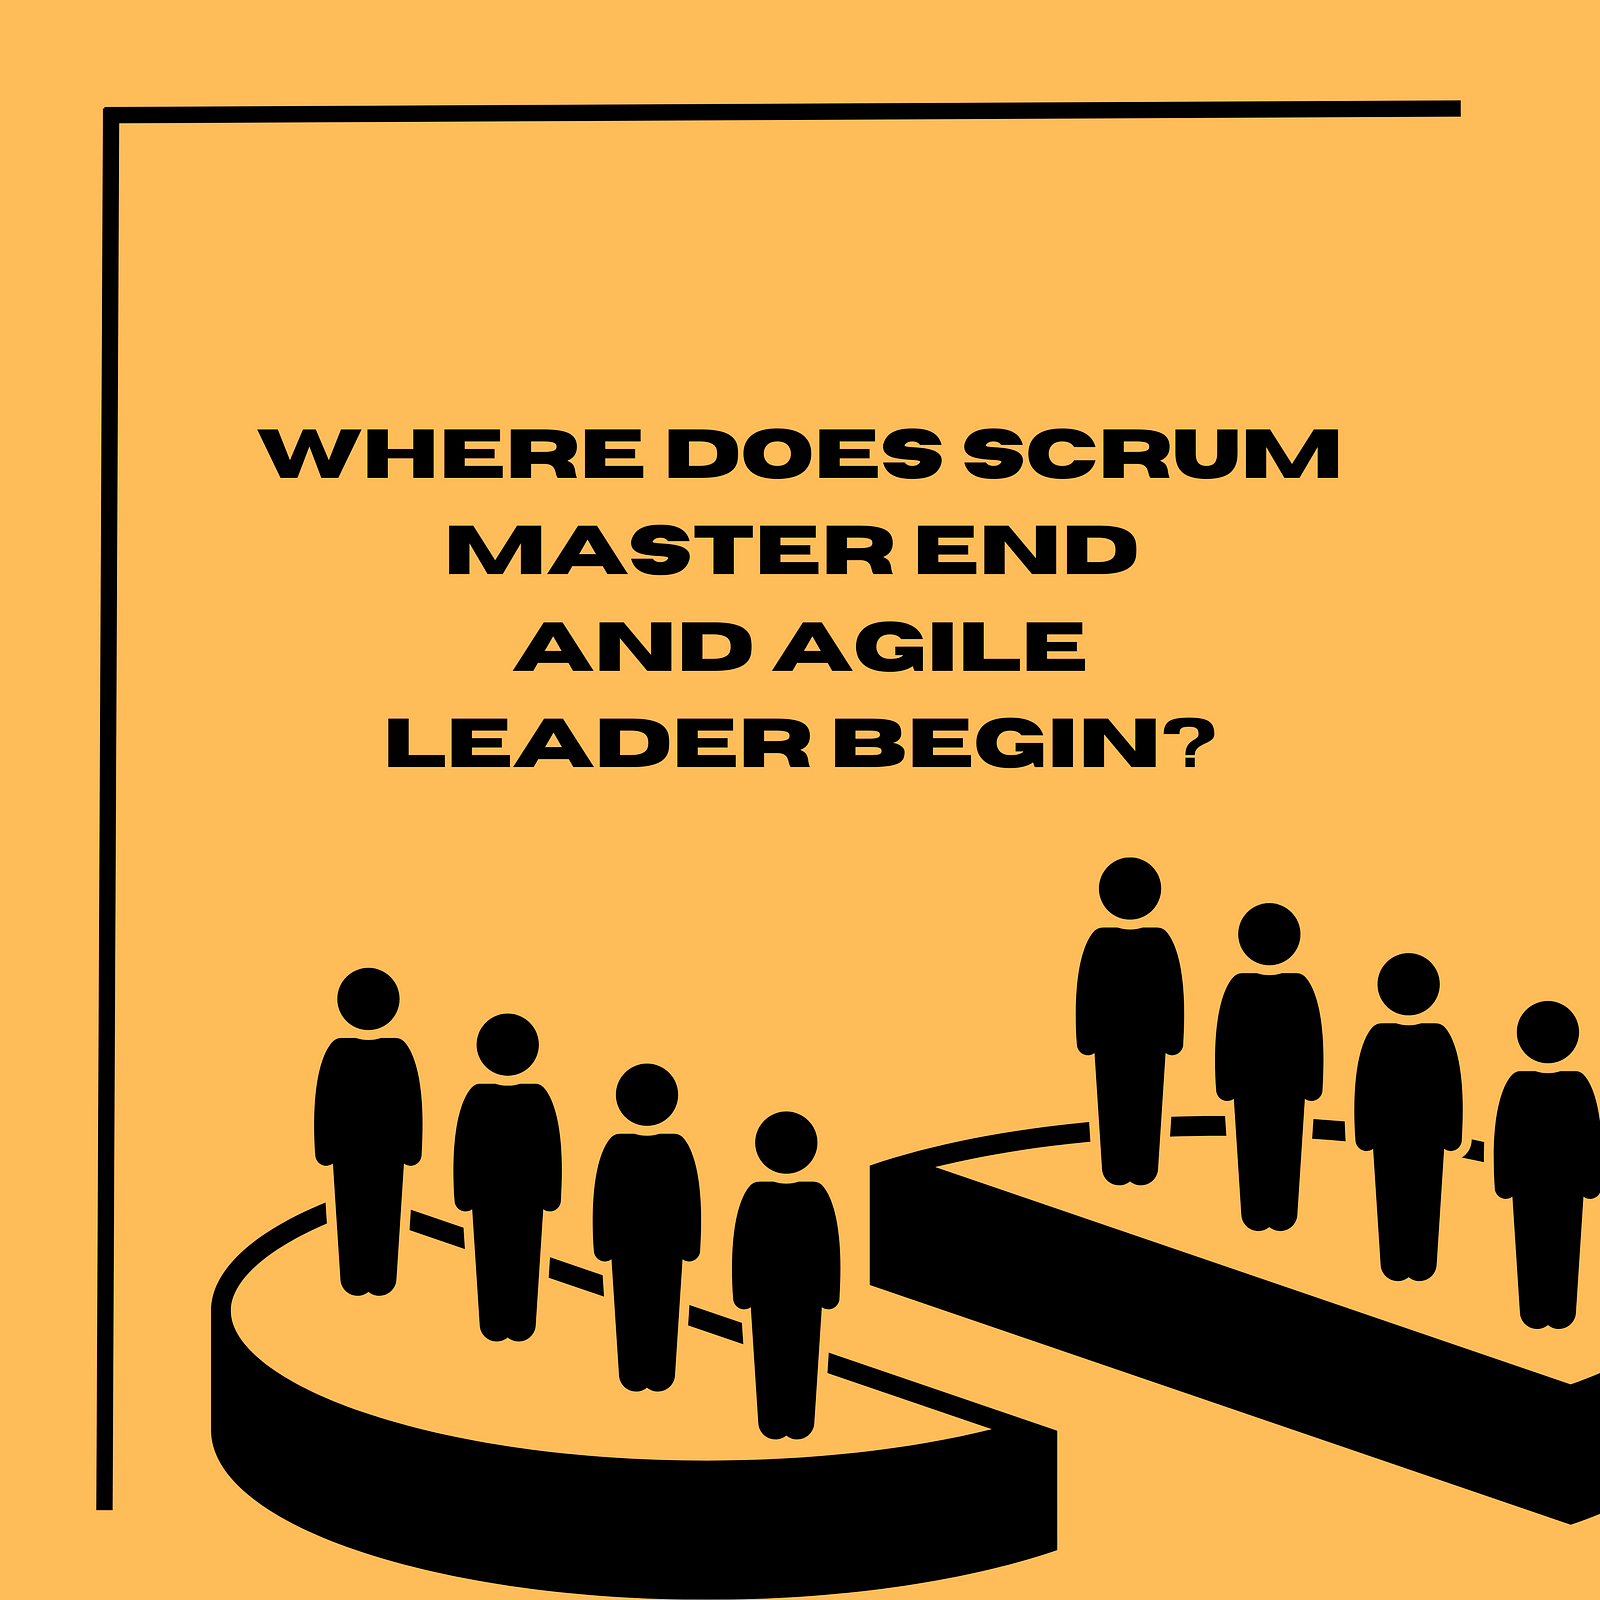 Where does the Scrum Master end and Agile Leader begin?